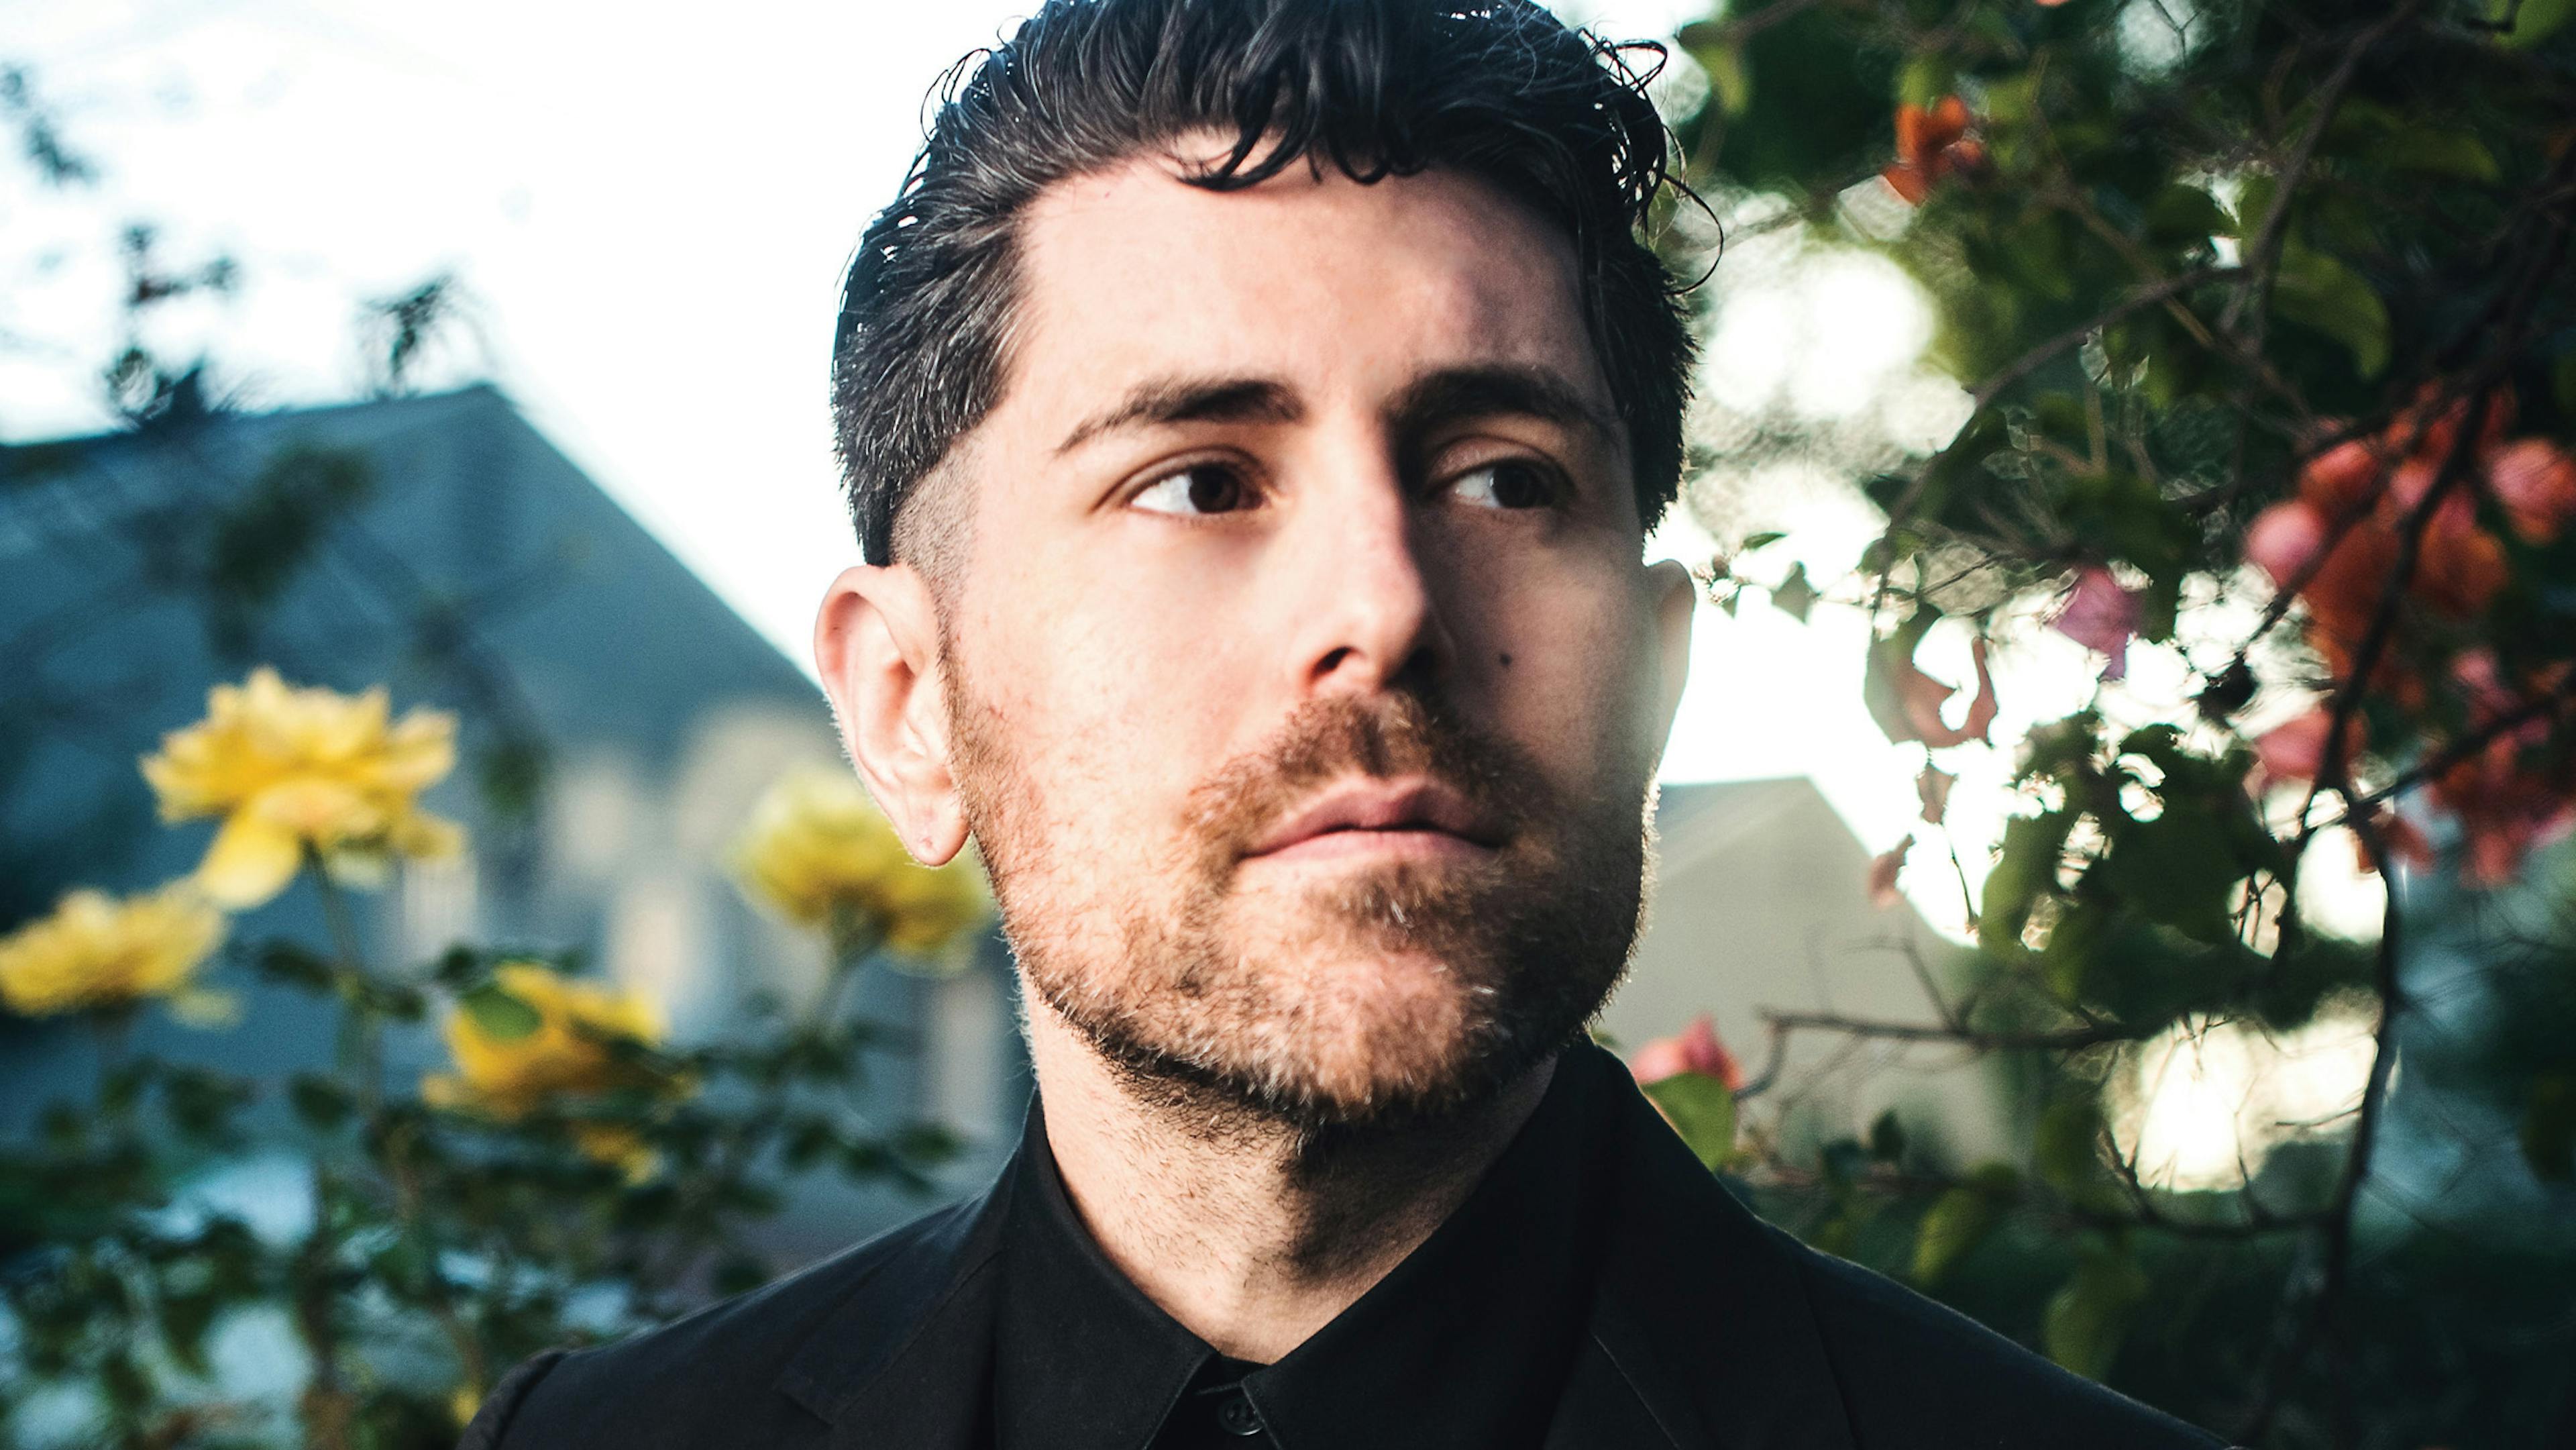 AFI’s Davey Havok: The 10 songs that changed my life